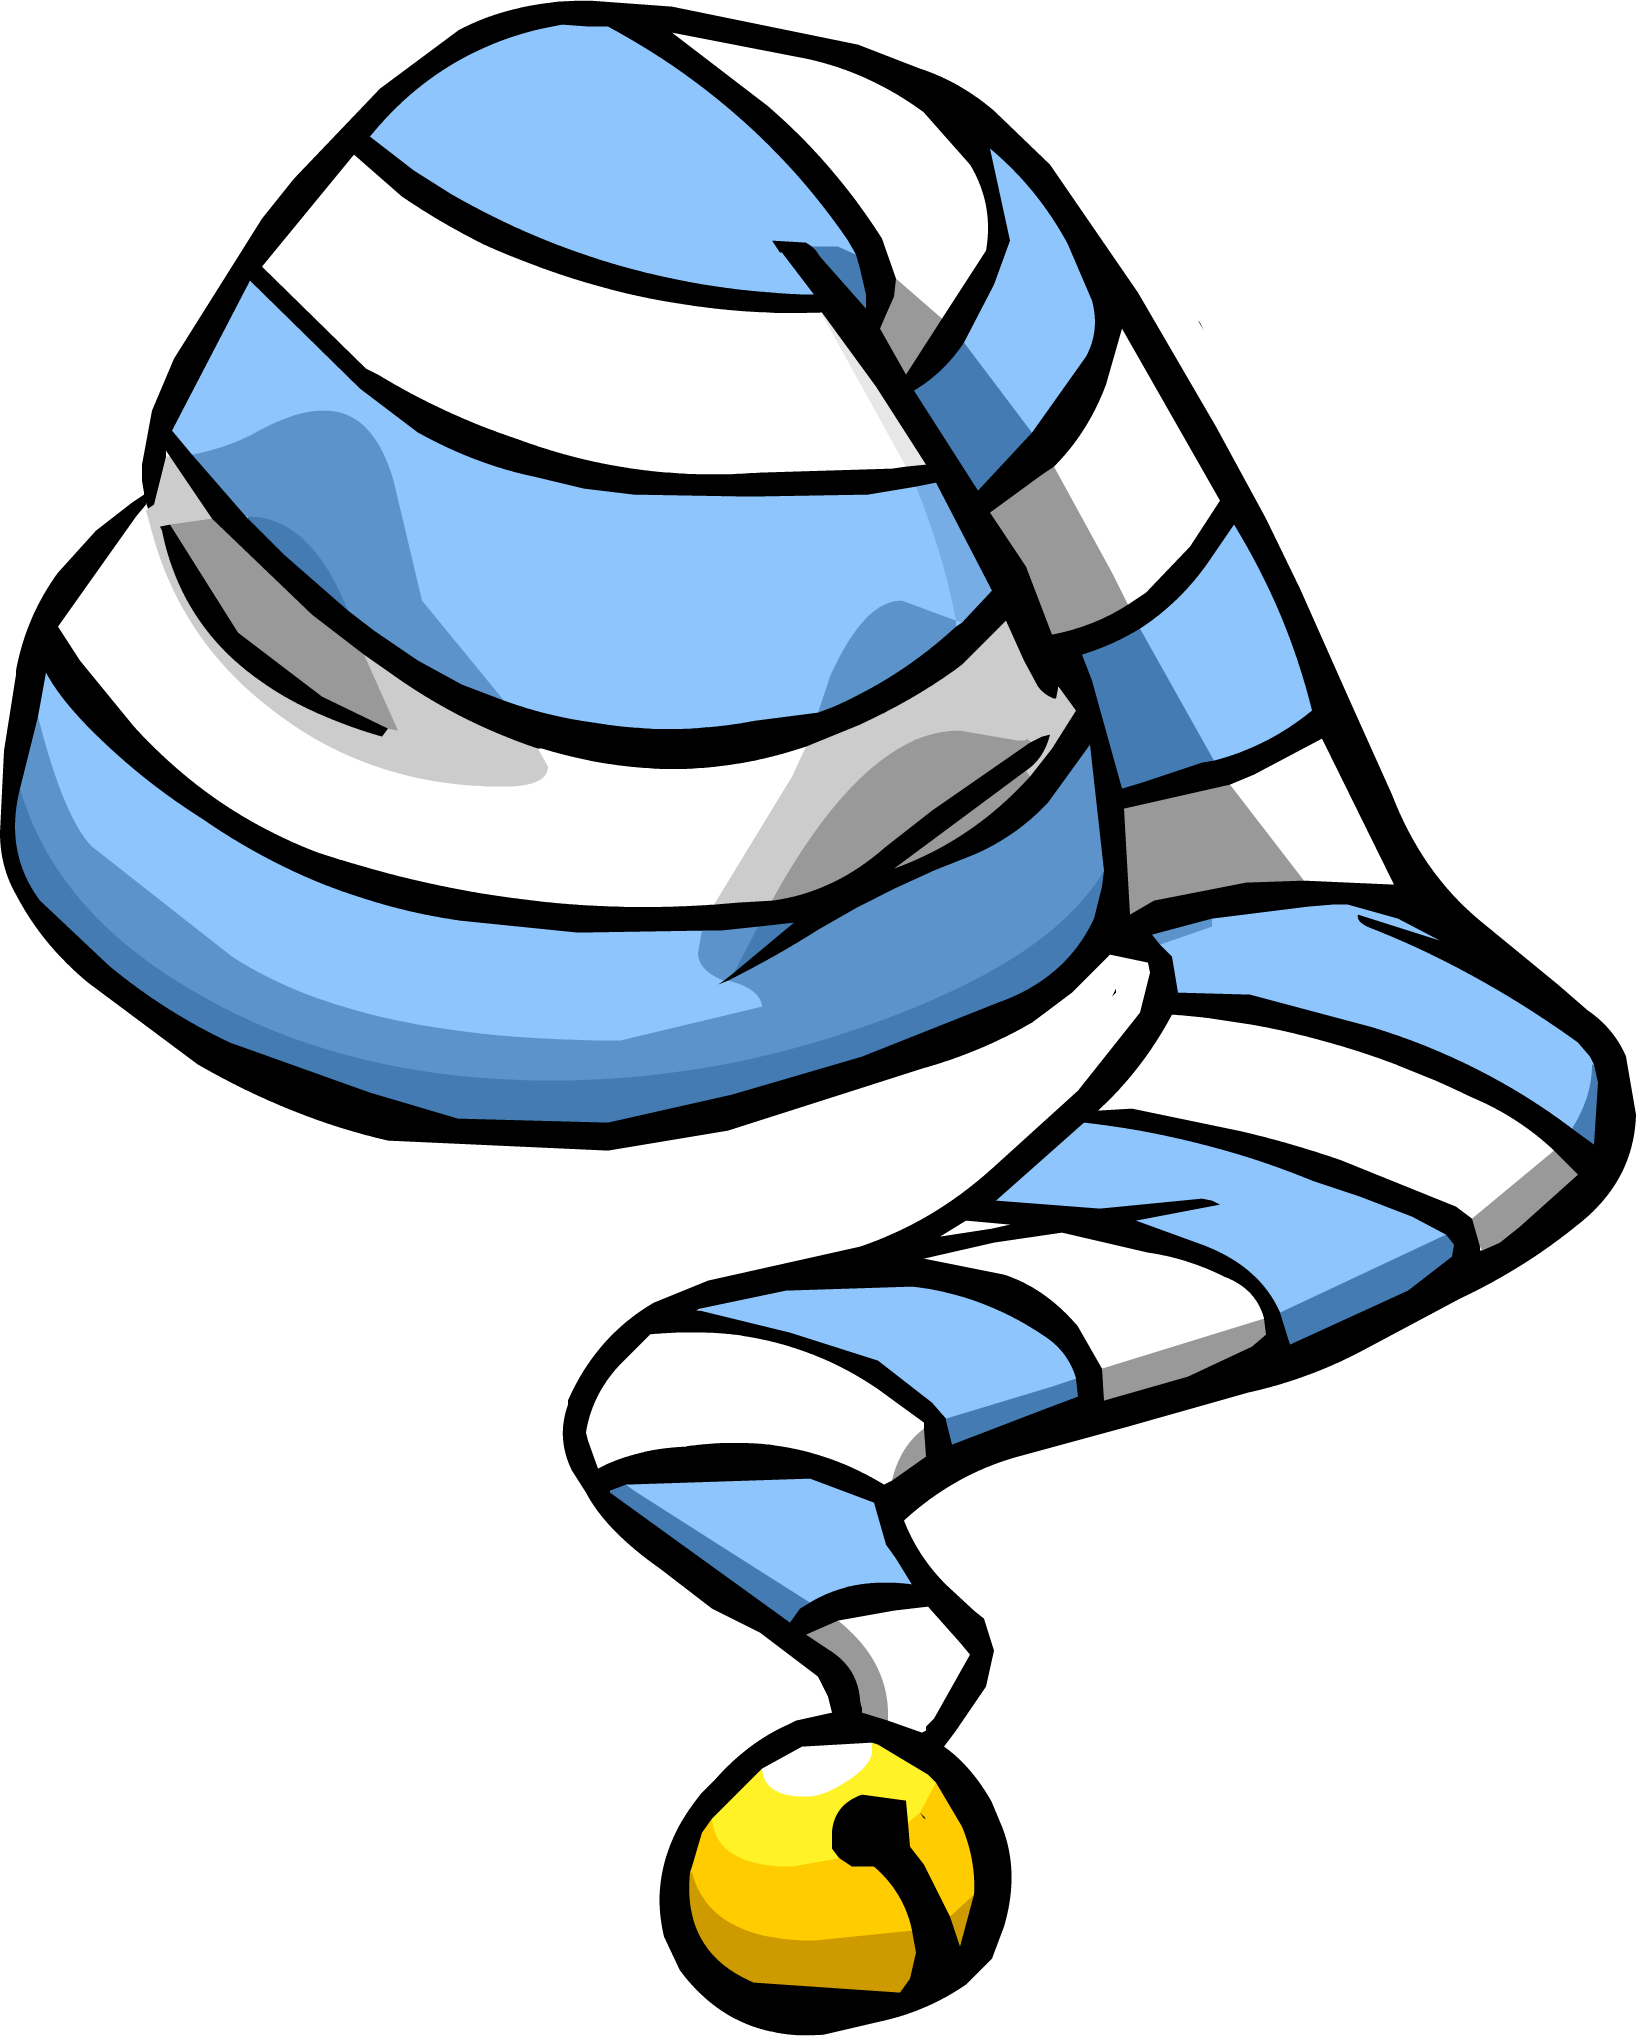 Pajama clipart hat. Sleep pencil and in